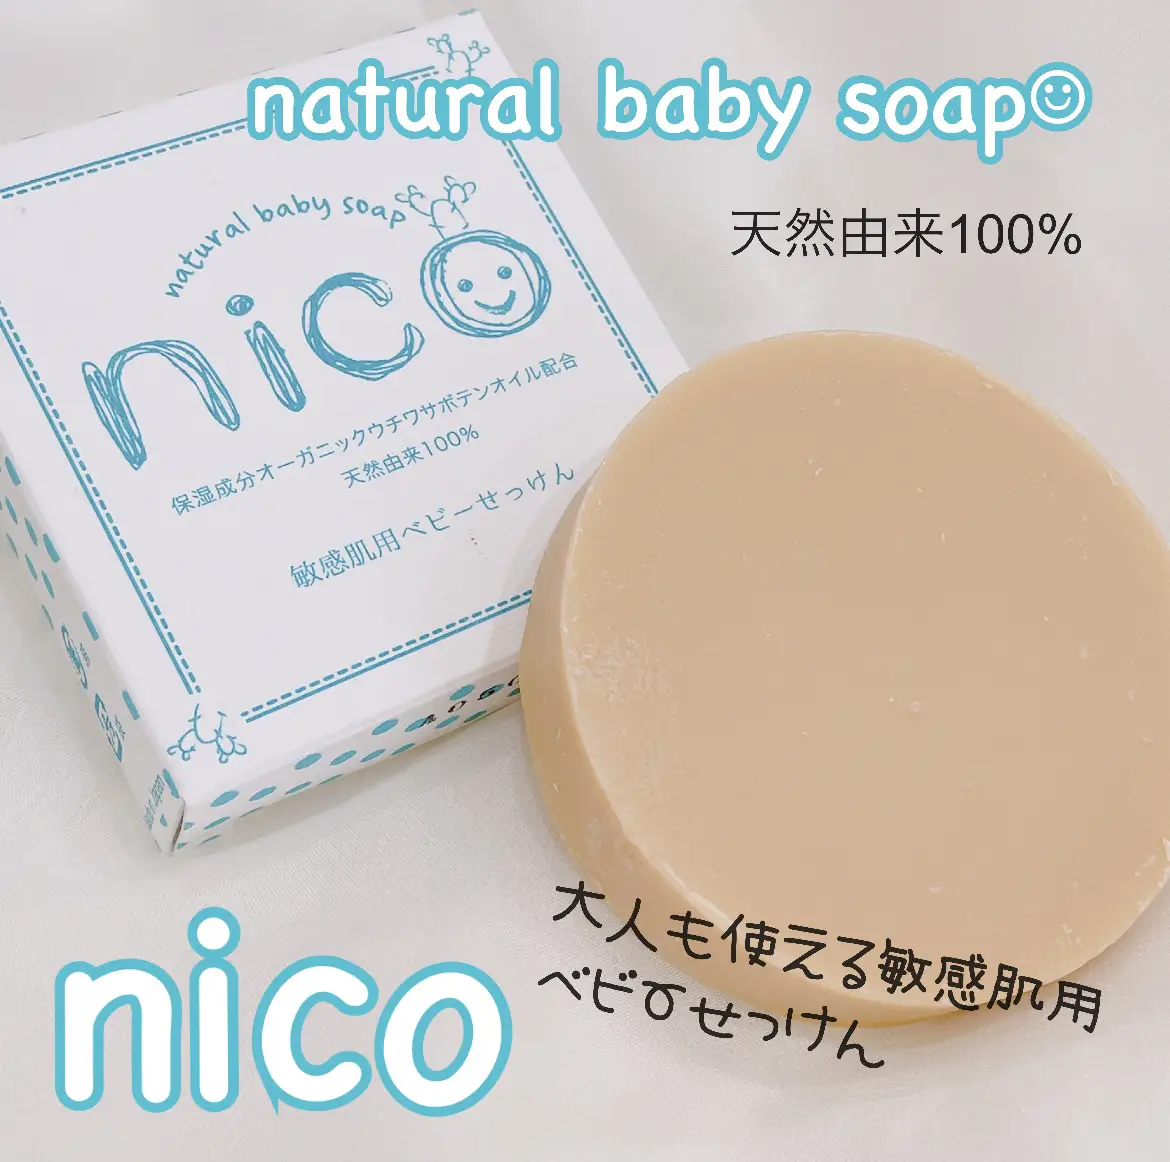 Baby soap that can be used not only for adults but also for babies